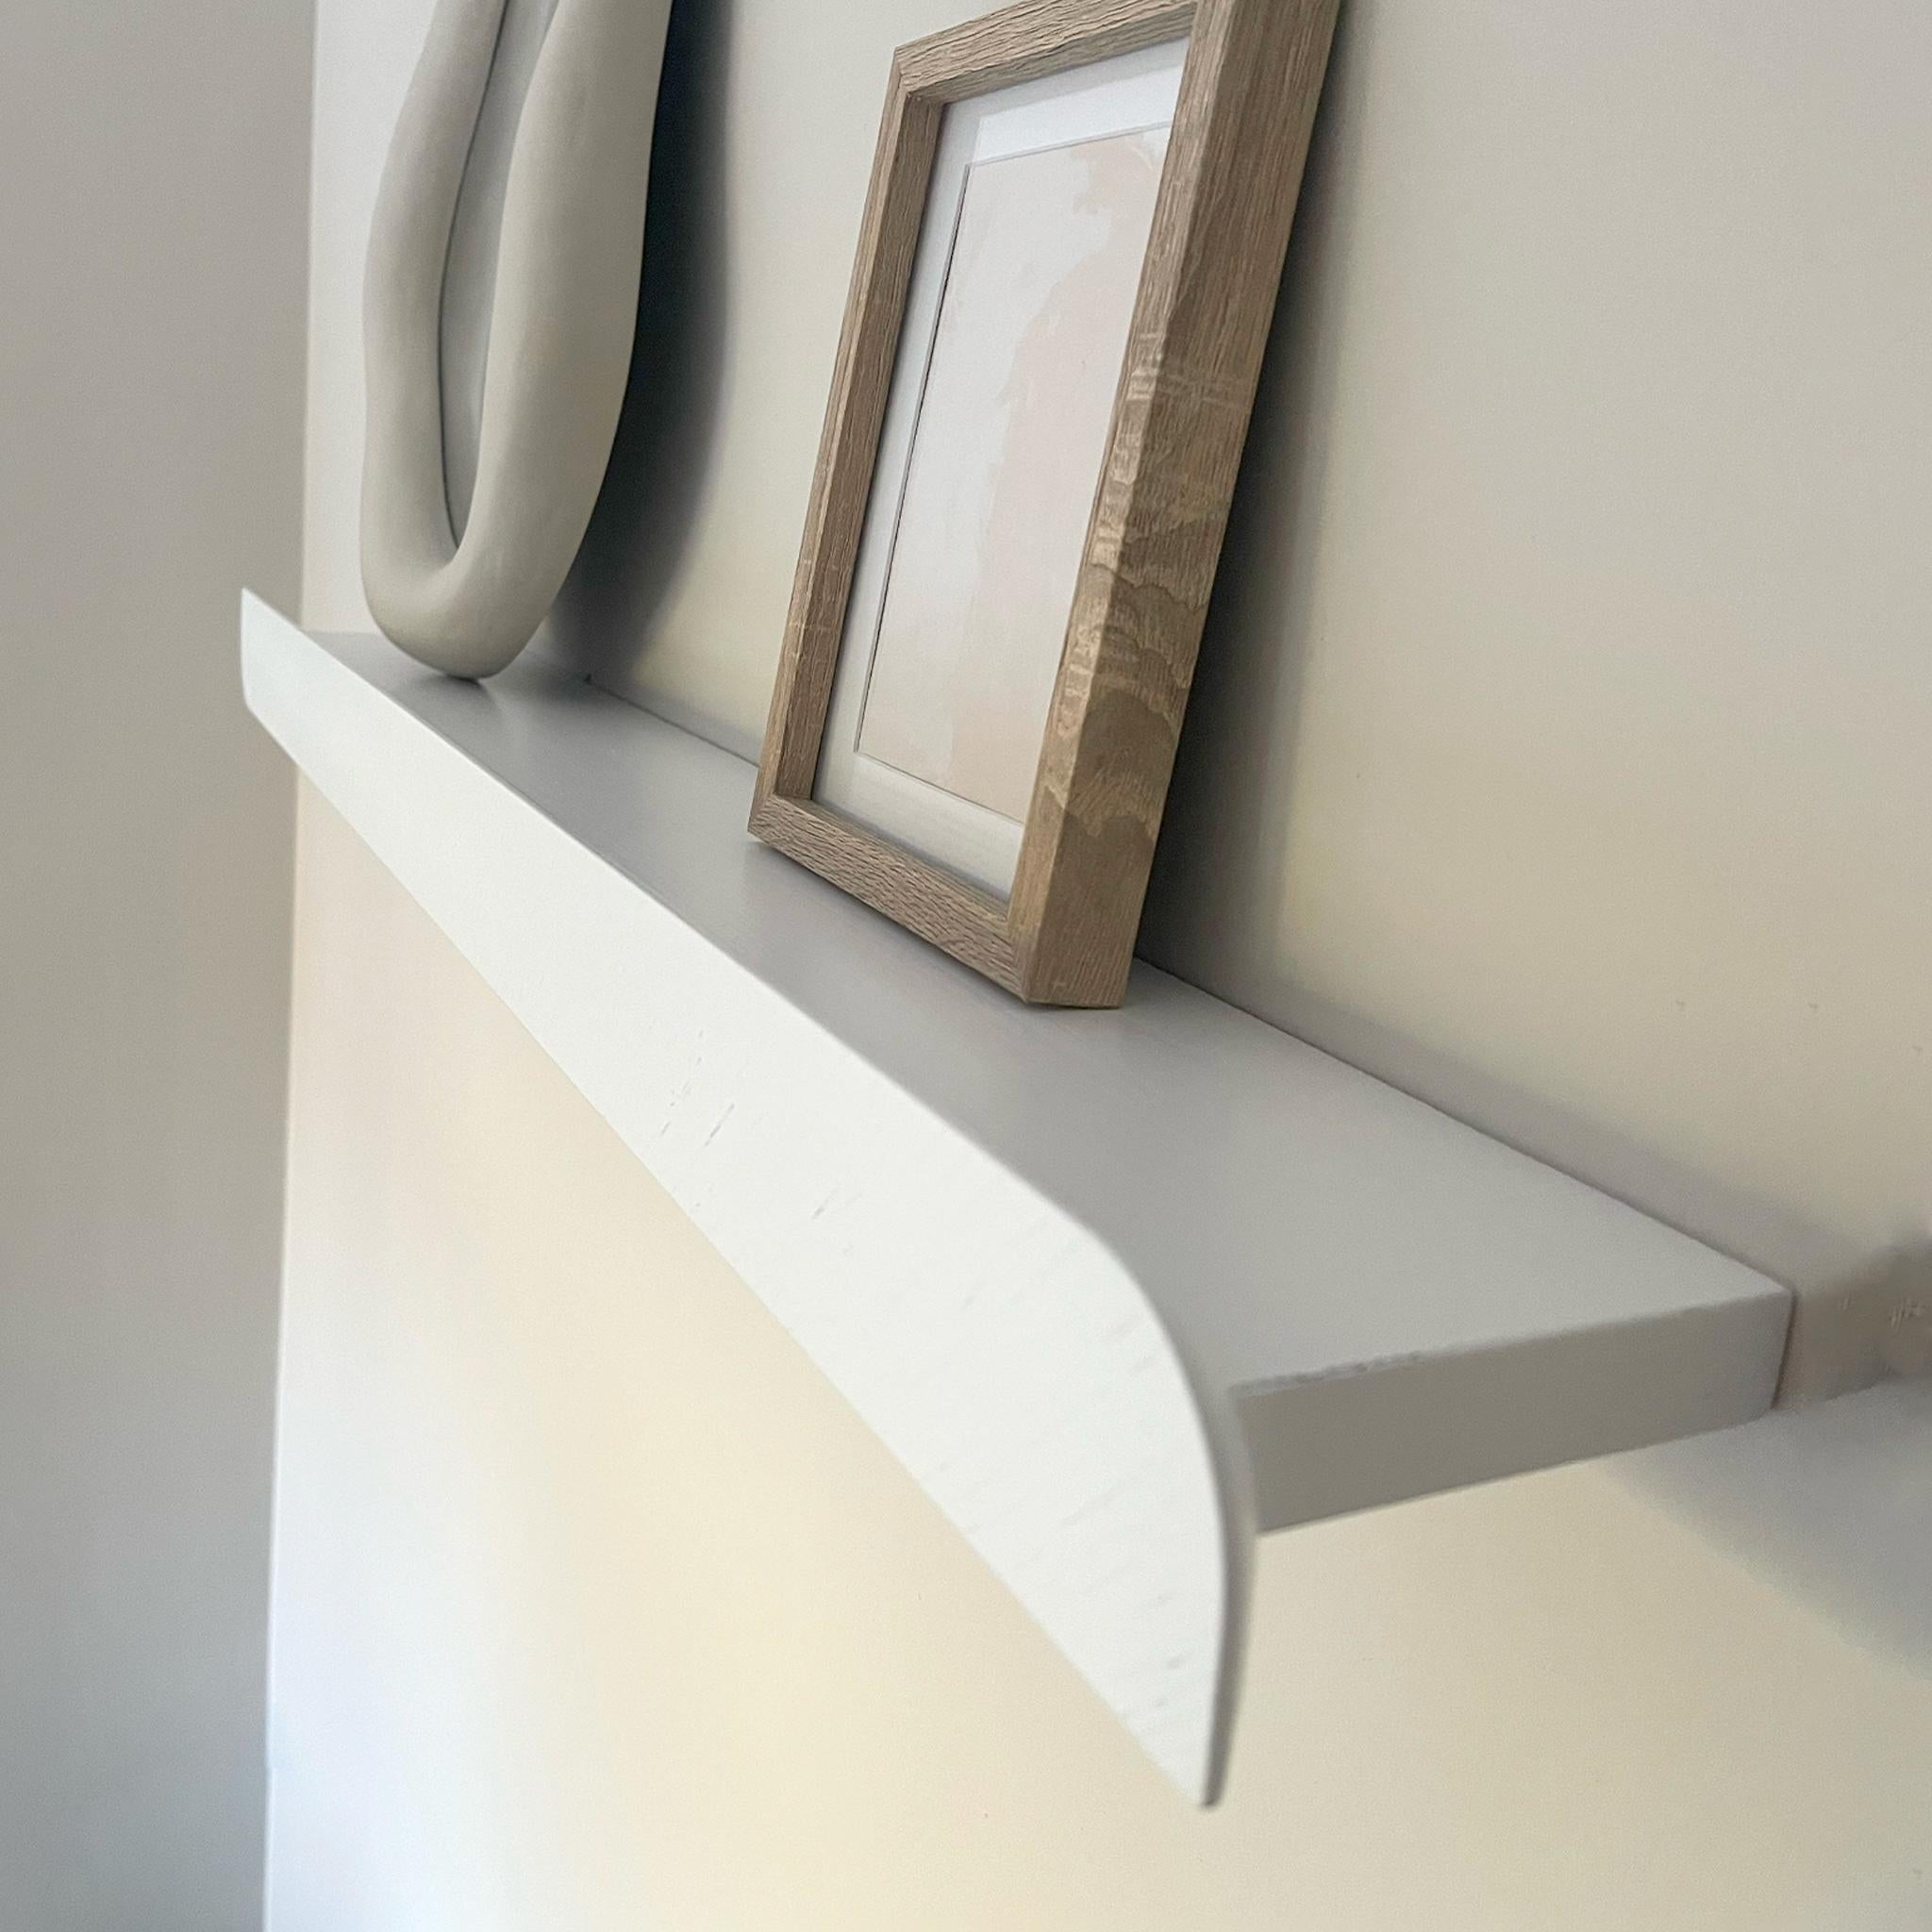 Cielo Wall Shelf, Small White In New Condition For Sale In Madrid, Madrid